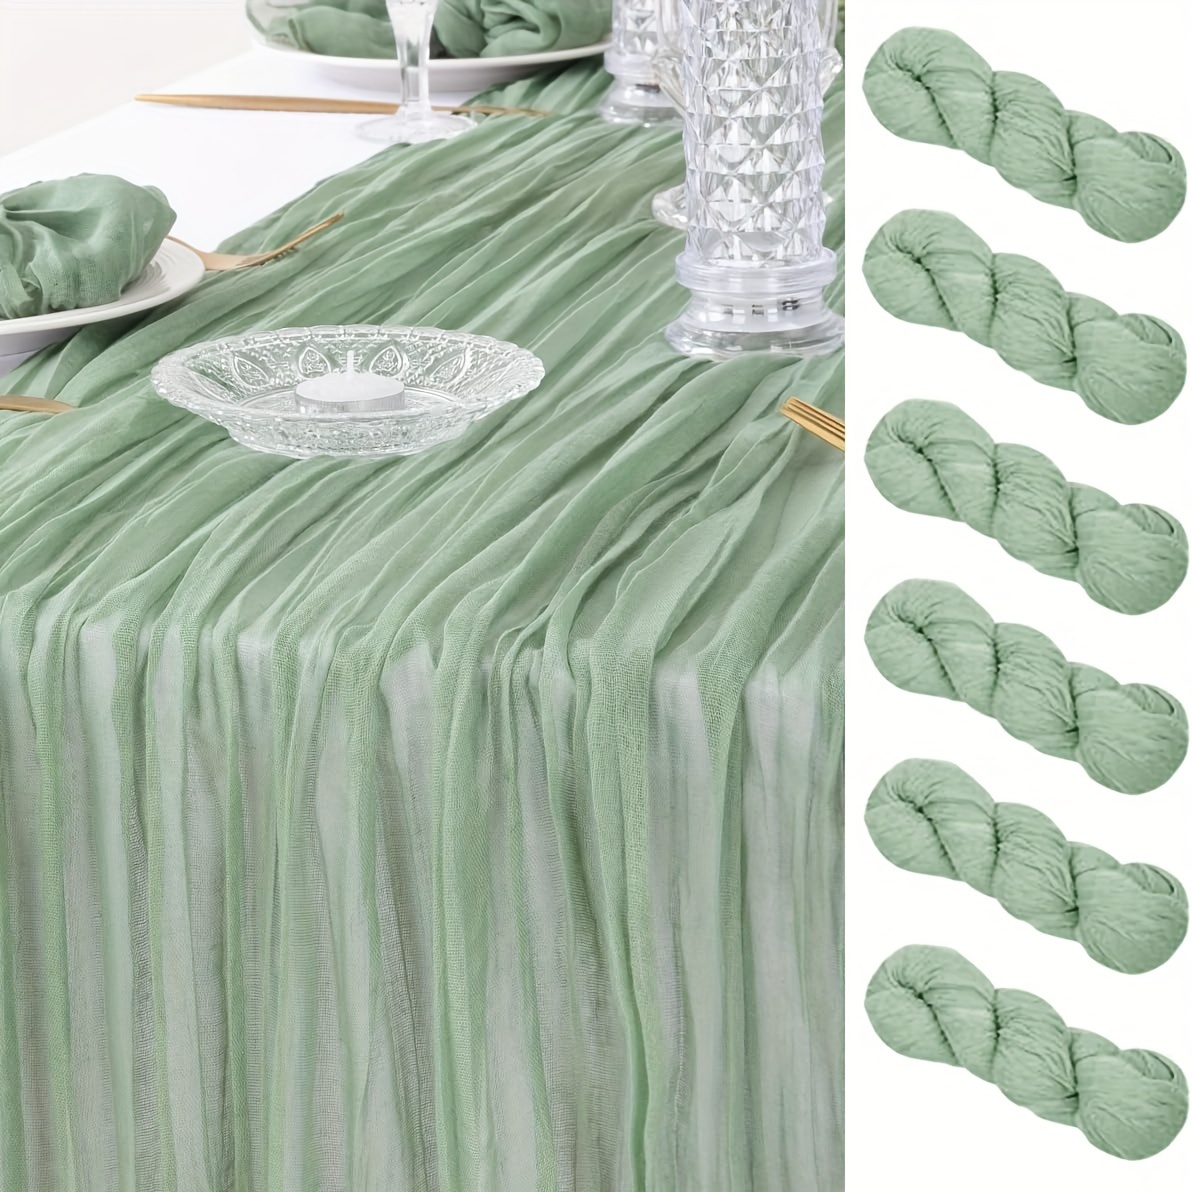 

6-piece Elegant Tulle Tablecloths - 25.5"x70.8" | Perfect For Weddings, Baby Showers, Birthdays & Easter Decorations